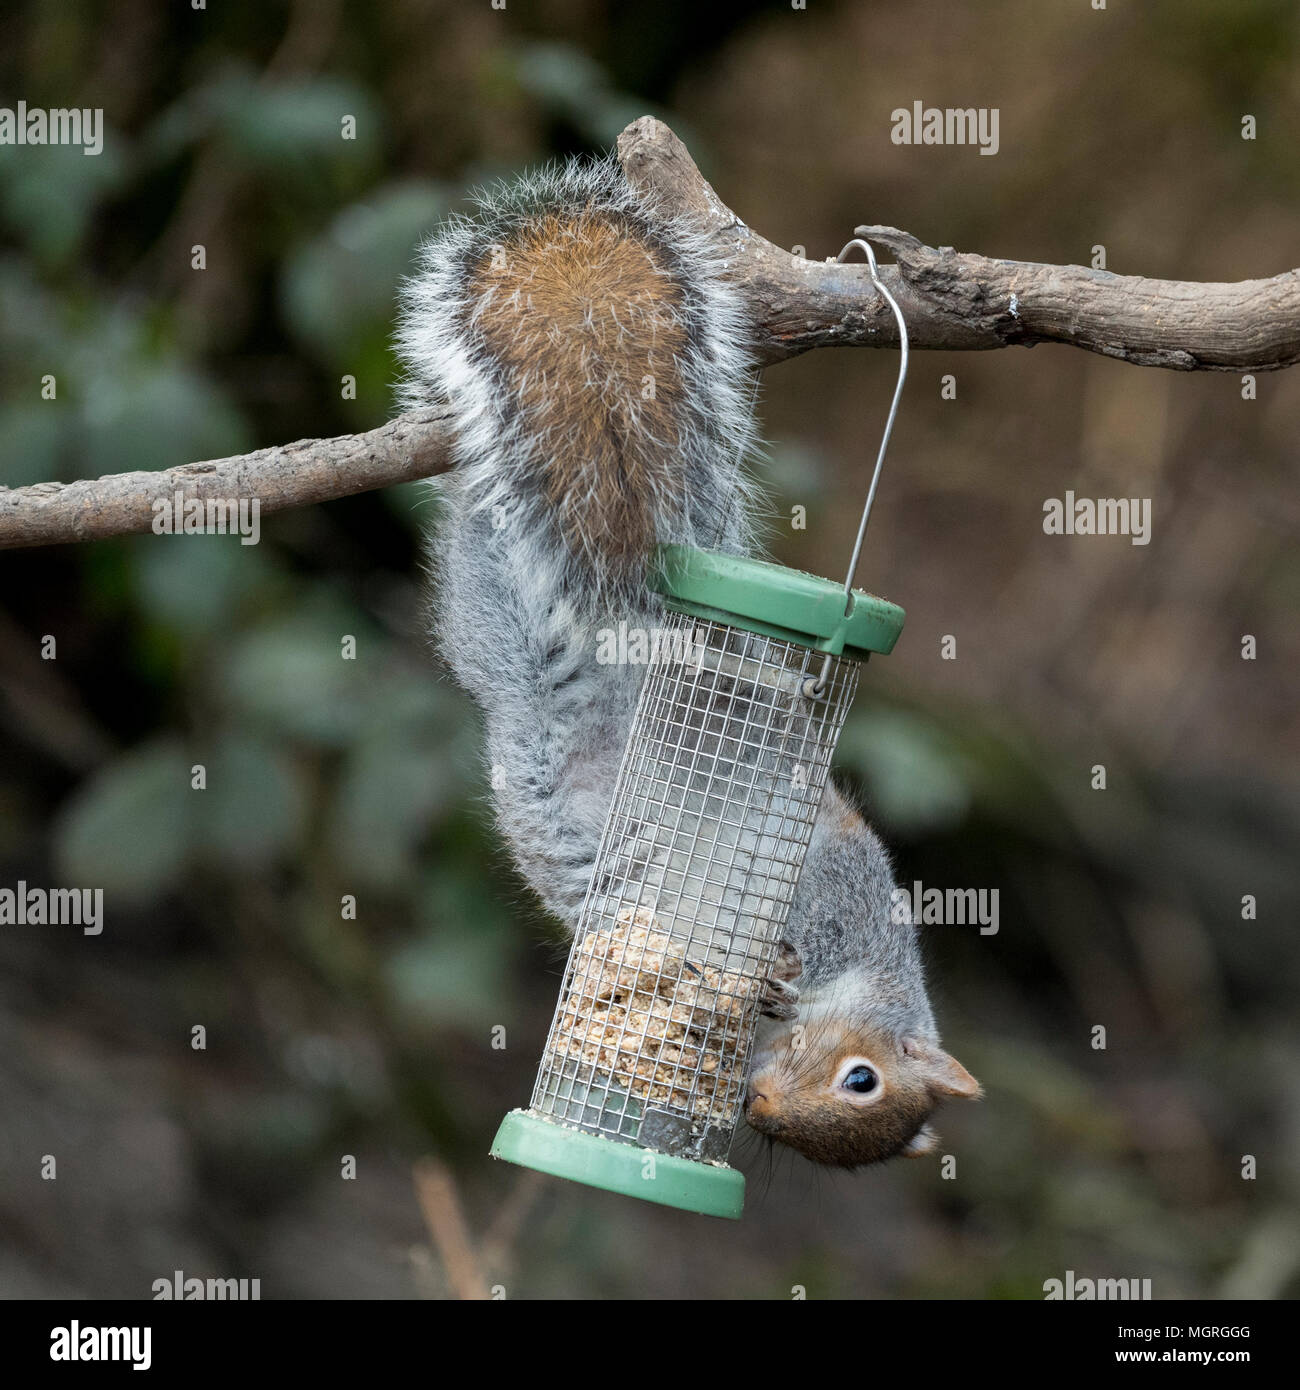 Cheeky thief - hungry grey squirrel hanging upside down from a tree, stealing & eating food in bird feeder - garden, West Yorkshire, England, UK. Stock Photo